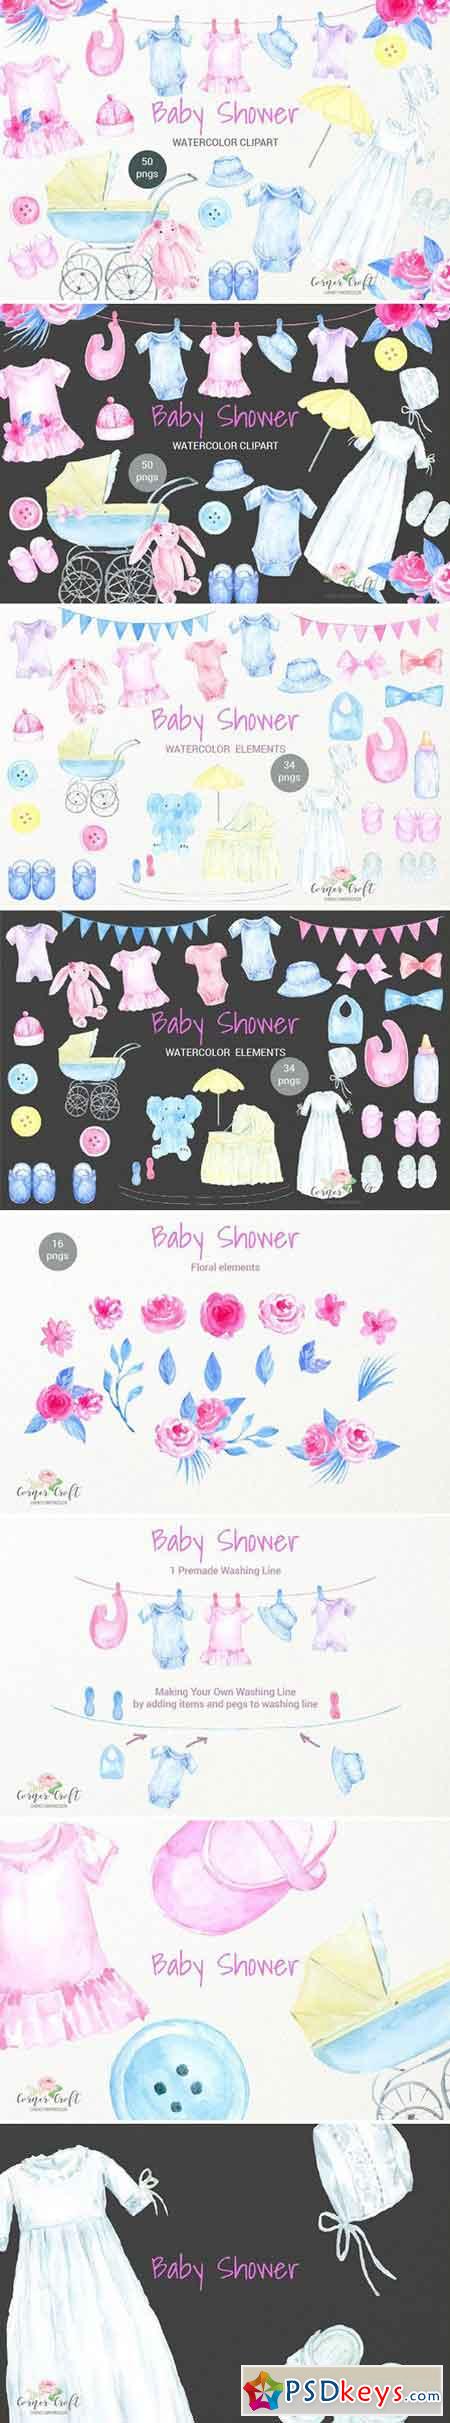 Watercolor Baby Shower Clipart 2232641